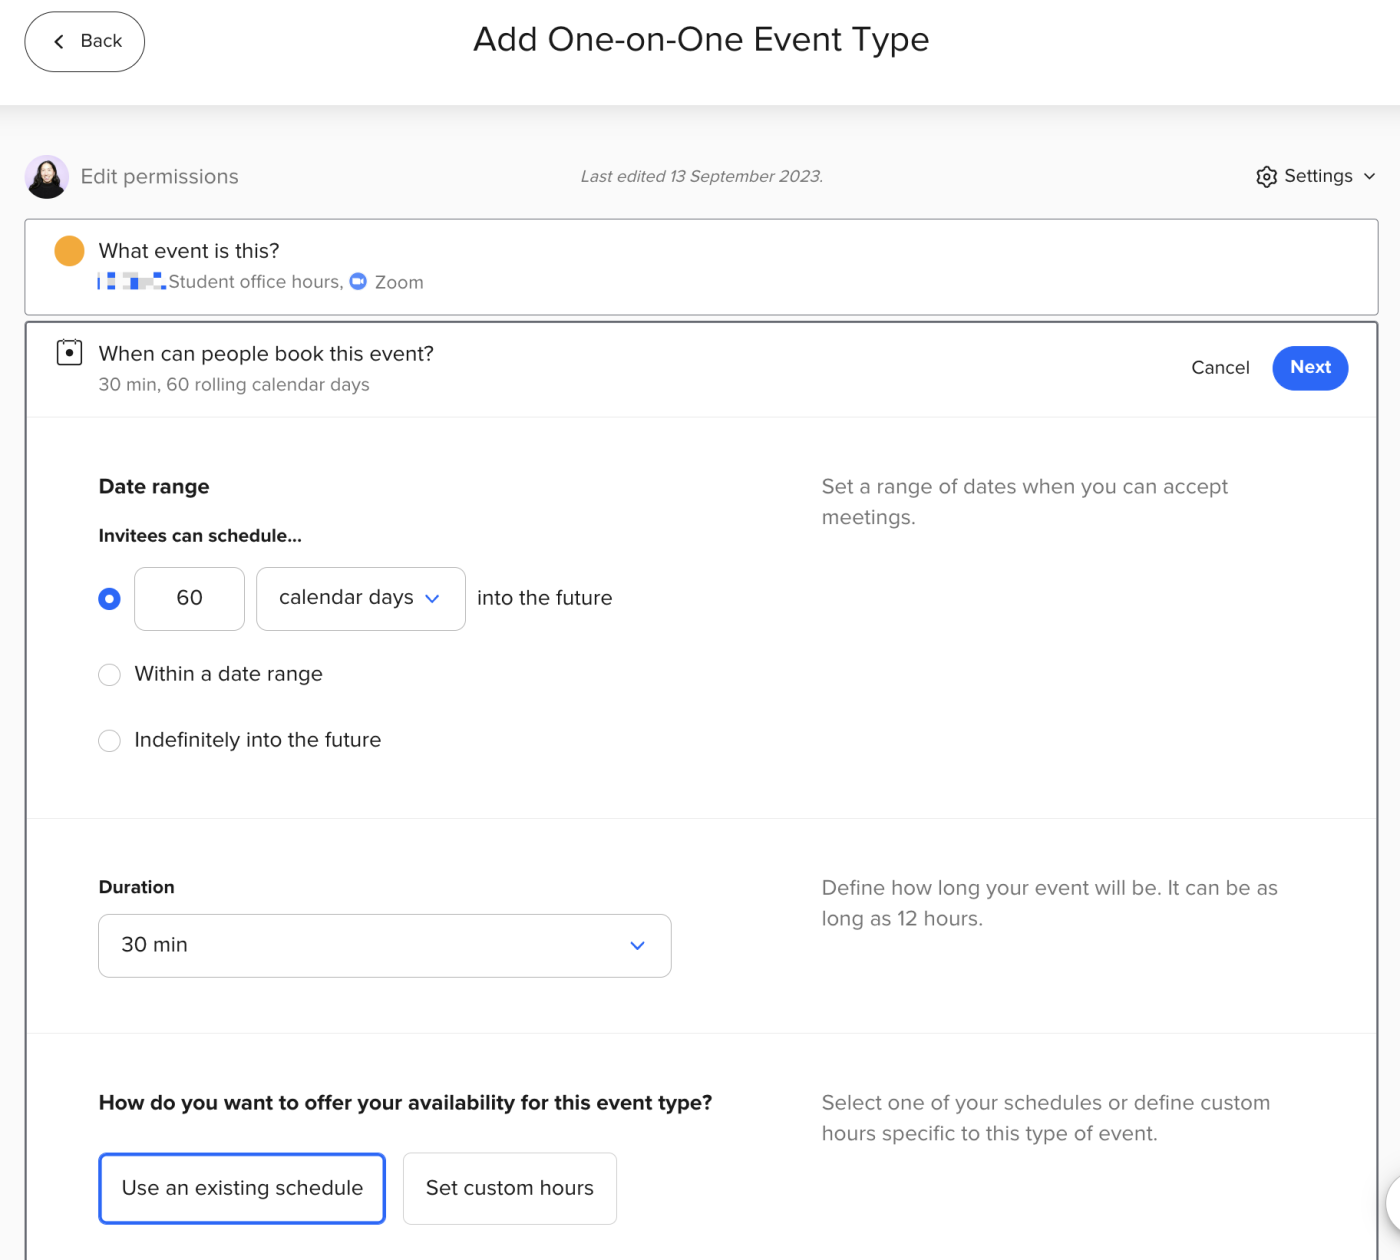 How to edit when people can book a one-on-one event type in Calendly.